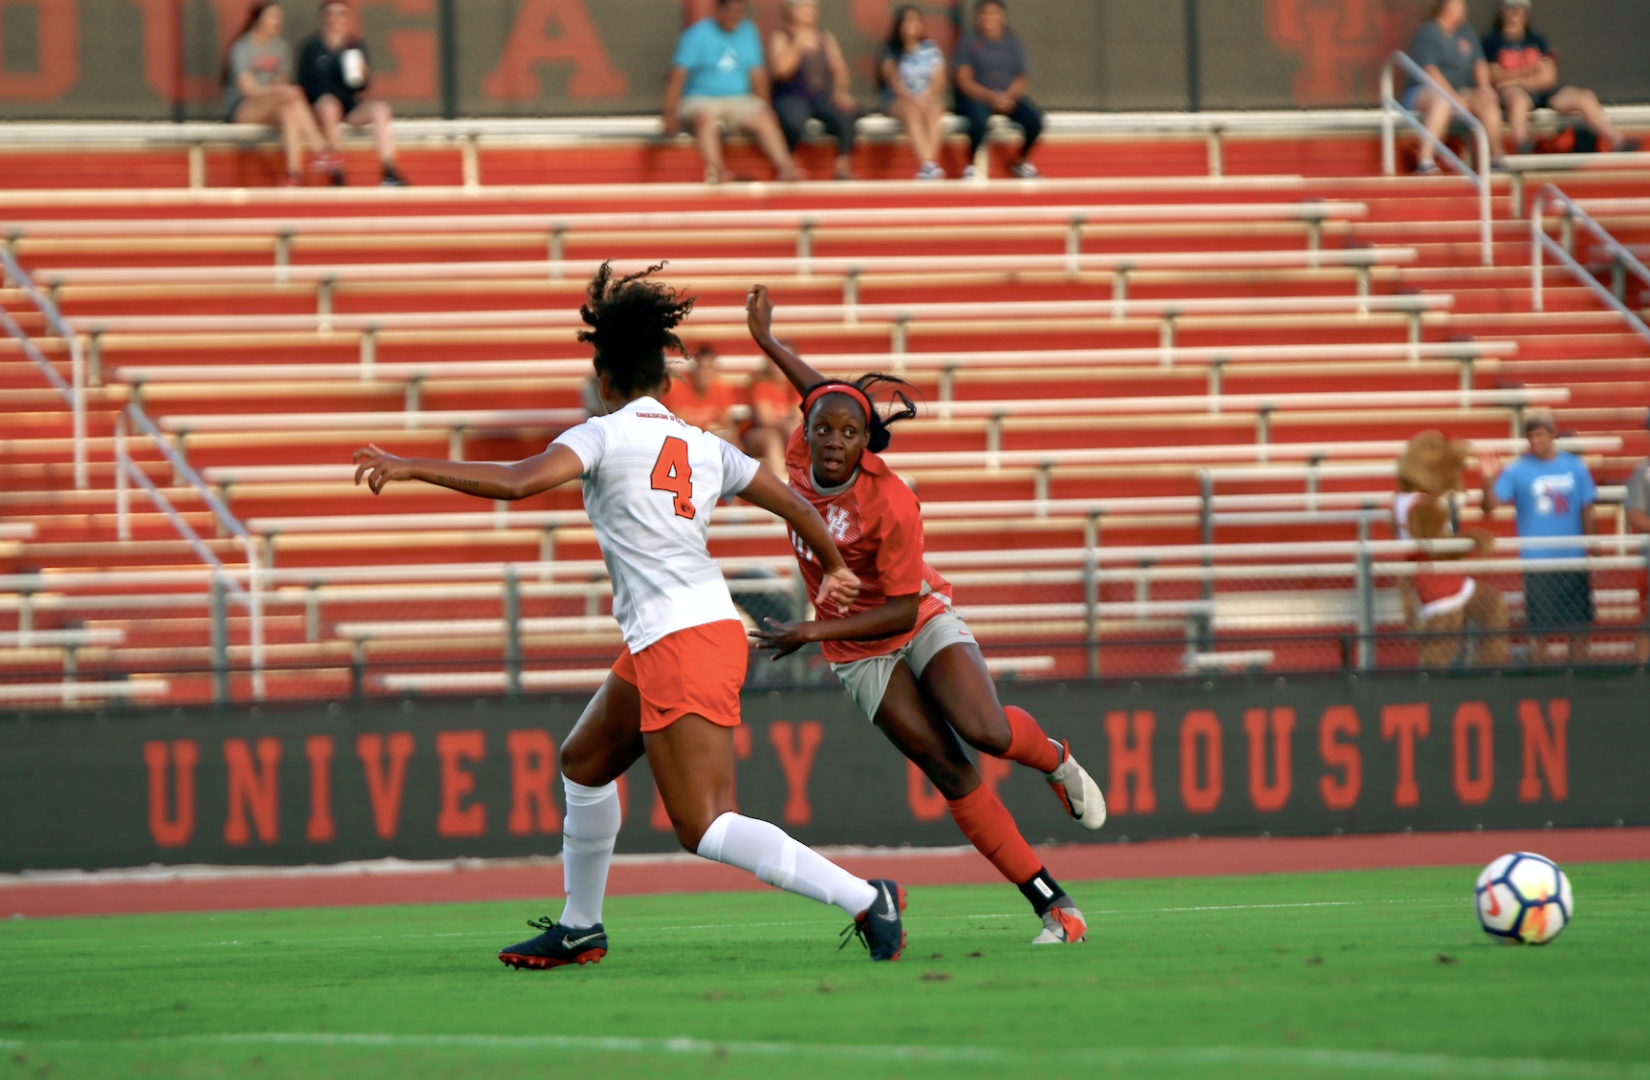 Junior forward Jazmin Grant propelled the Cougars to an overtime 2-1 win after scoring a golden goal. | File photo